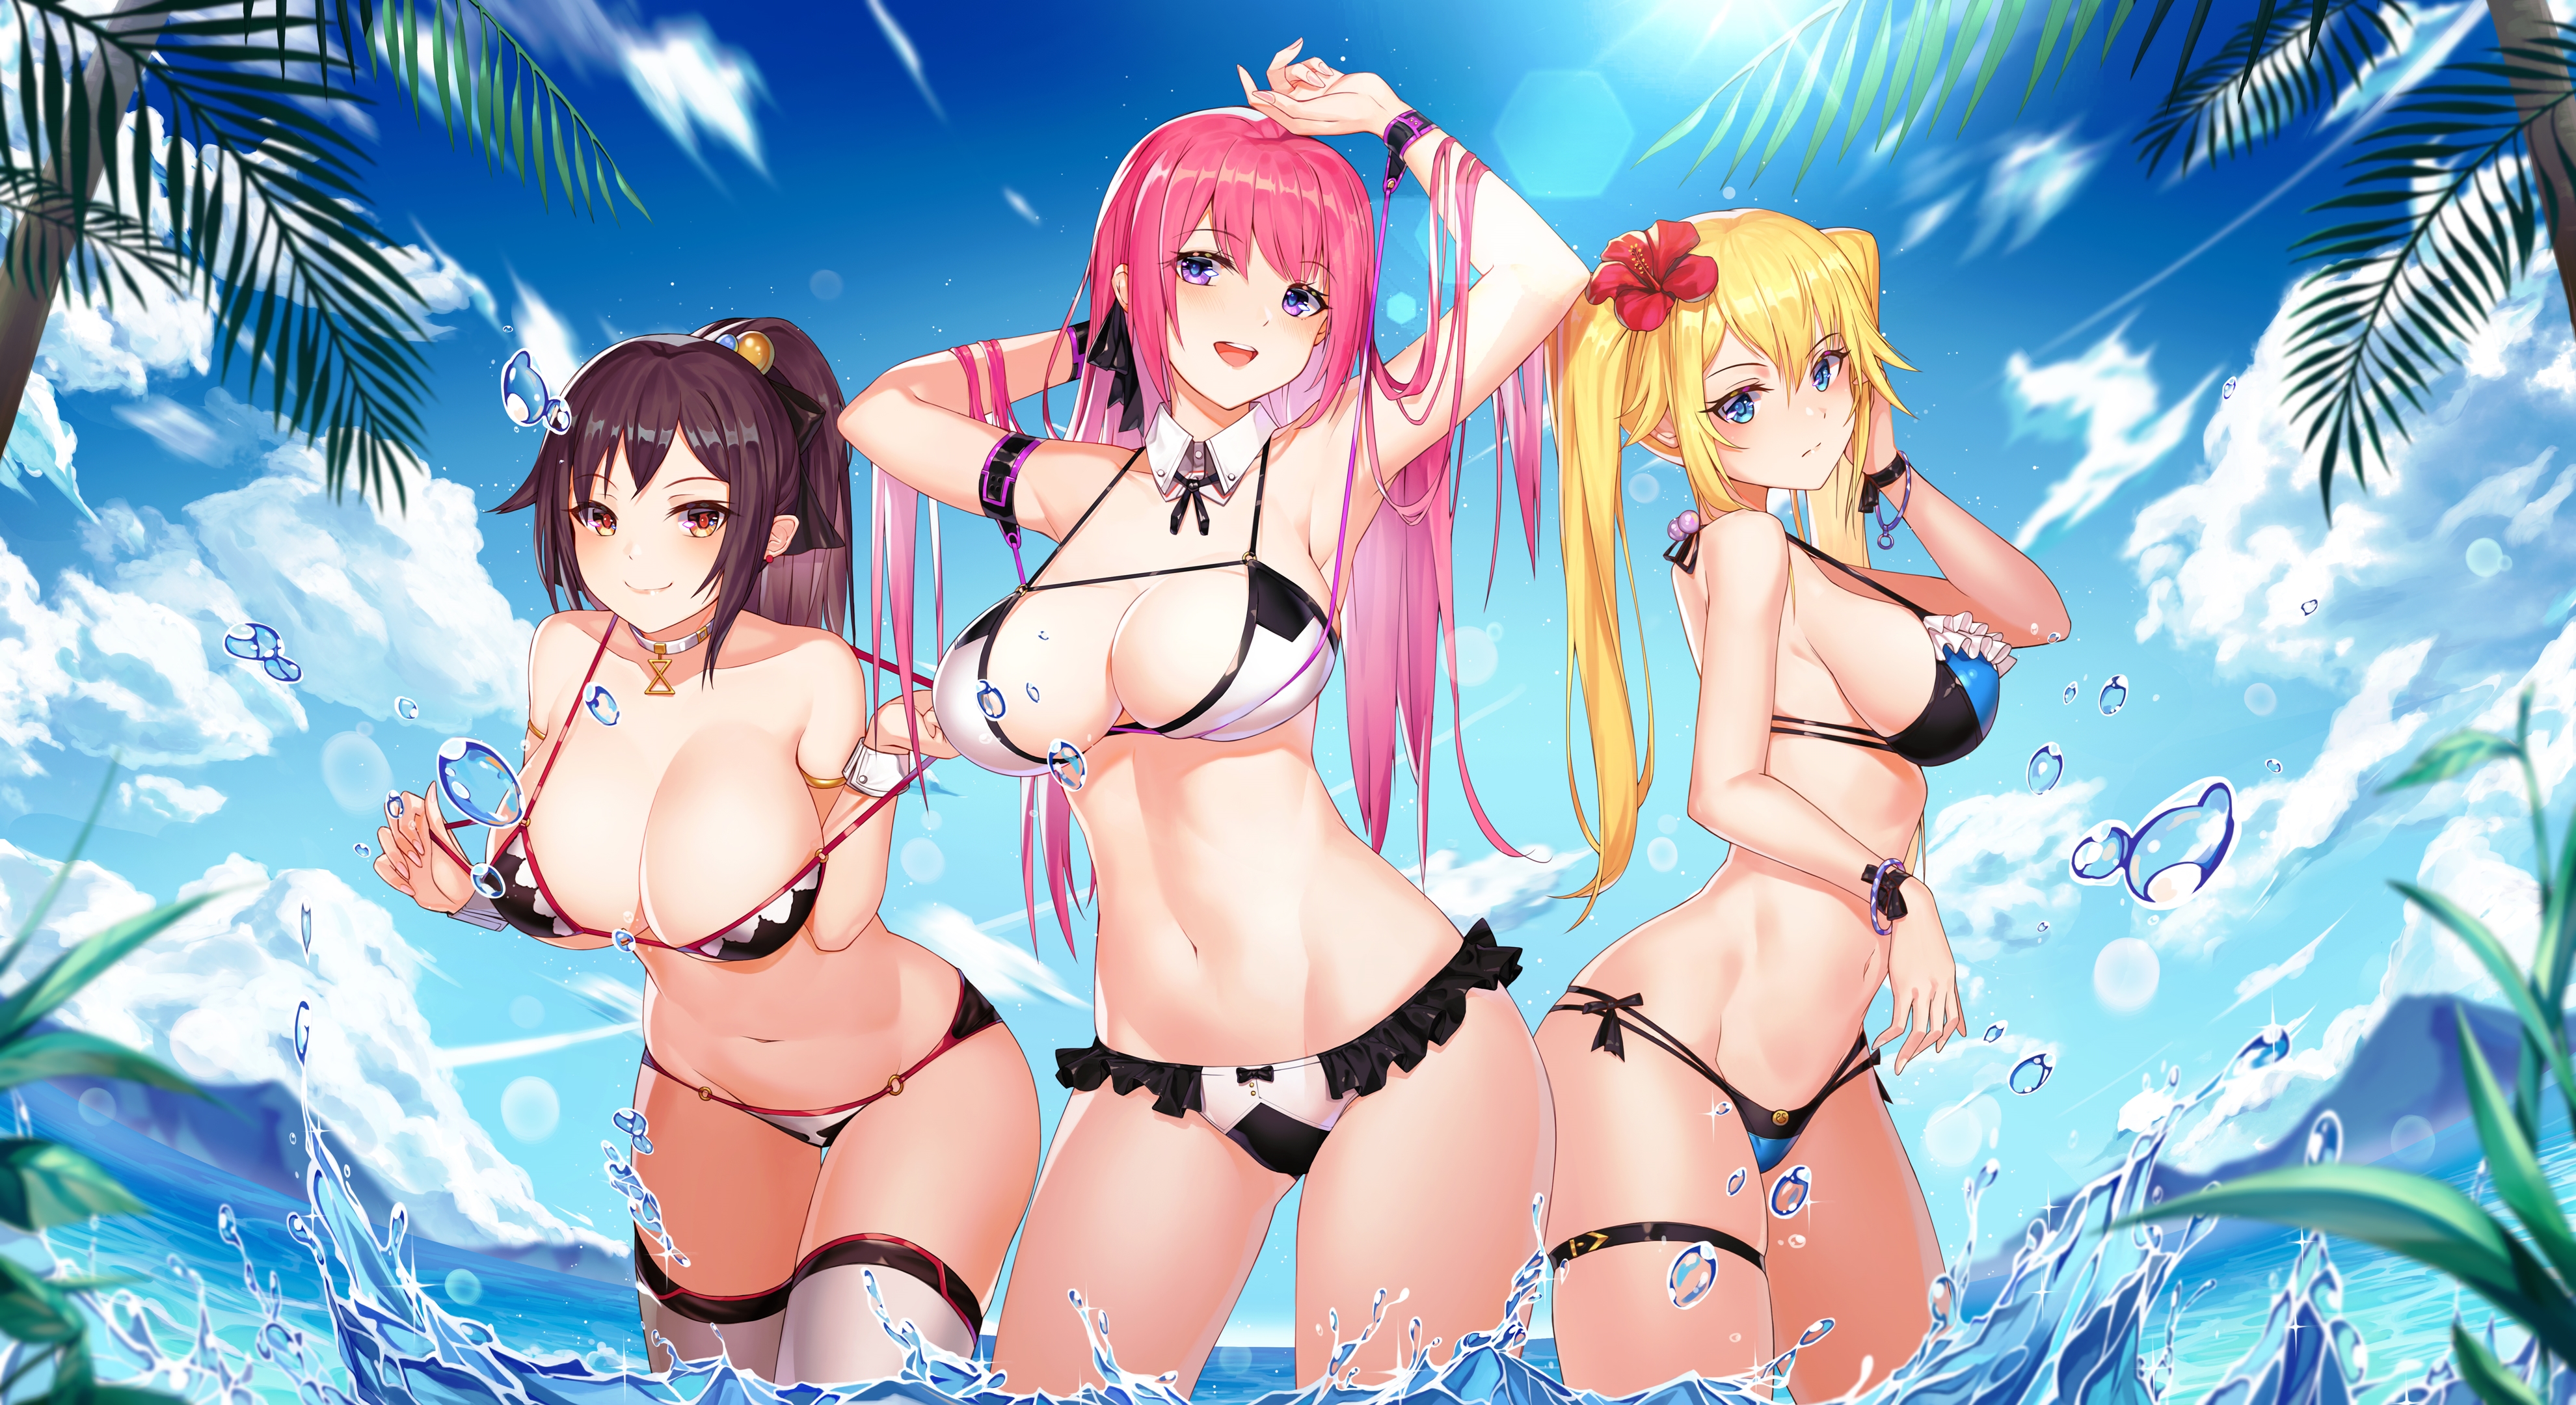 Anime 3960x2160 Btraphen anime anime girls bikini water smiling belly big boobs cleavage sideboob long hair brunette pink hair blonde women trio group of women standing in water arms up string bikini micro bikini palm trees clouds hibiscus looking at viewer water drops bubbles